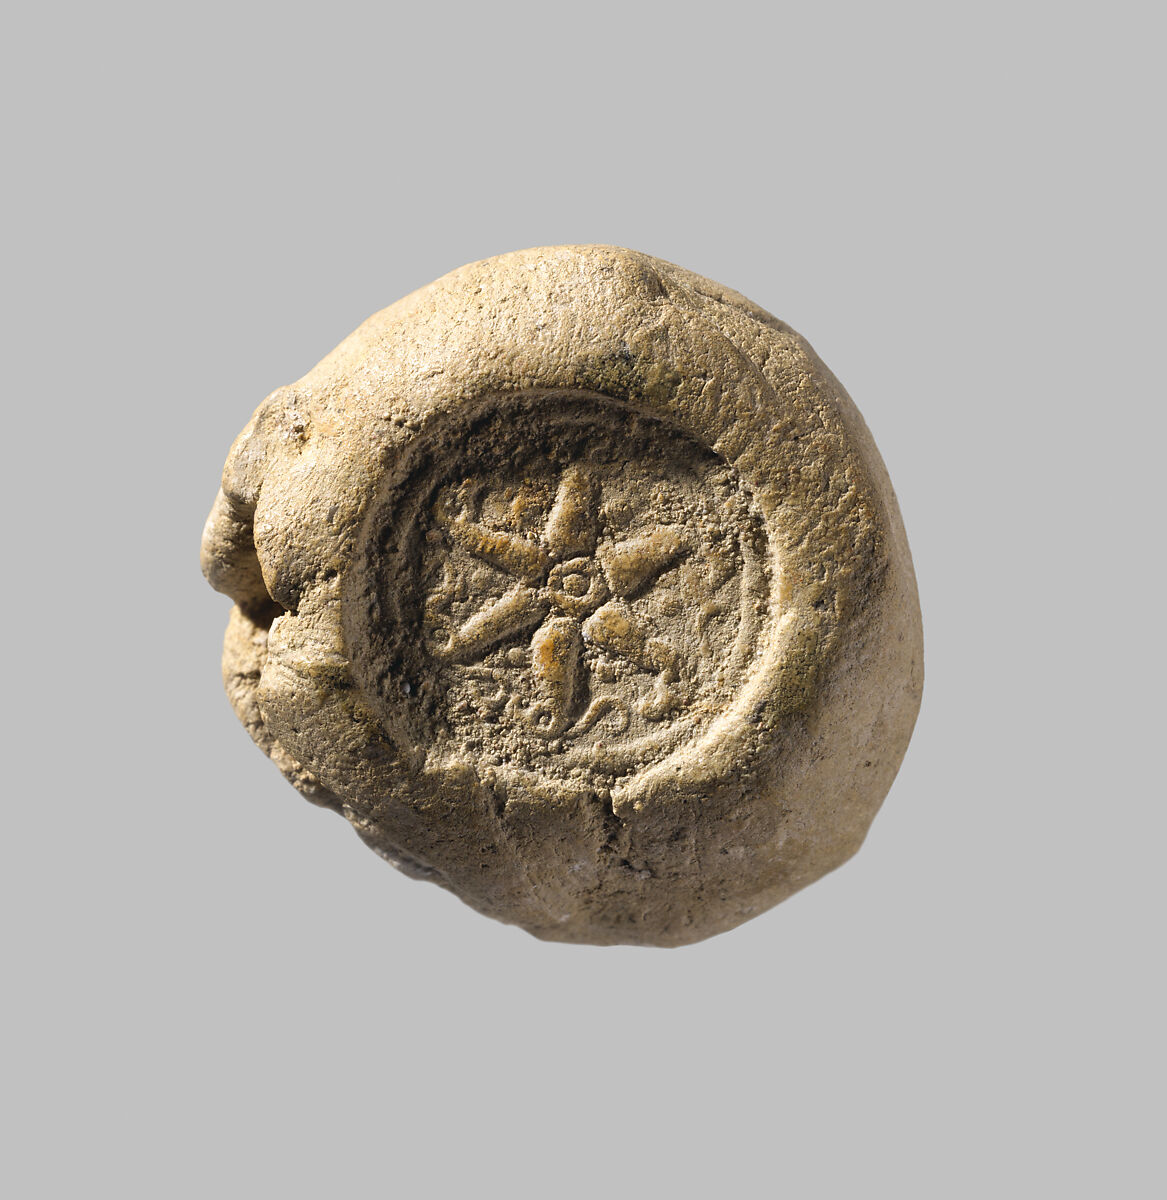 Sealing with stamp seal impressions: radiating griffins; banquet scene, Ceramic, Old Assyrian Trading Colony 